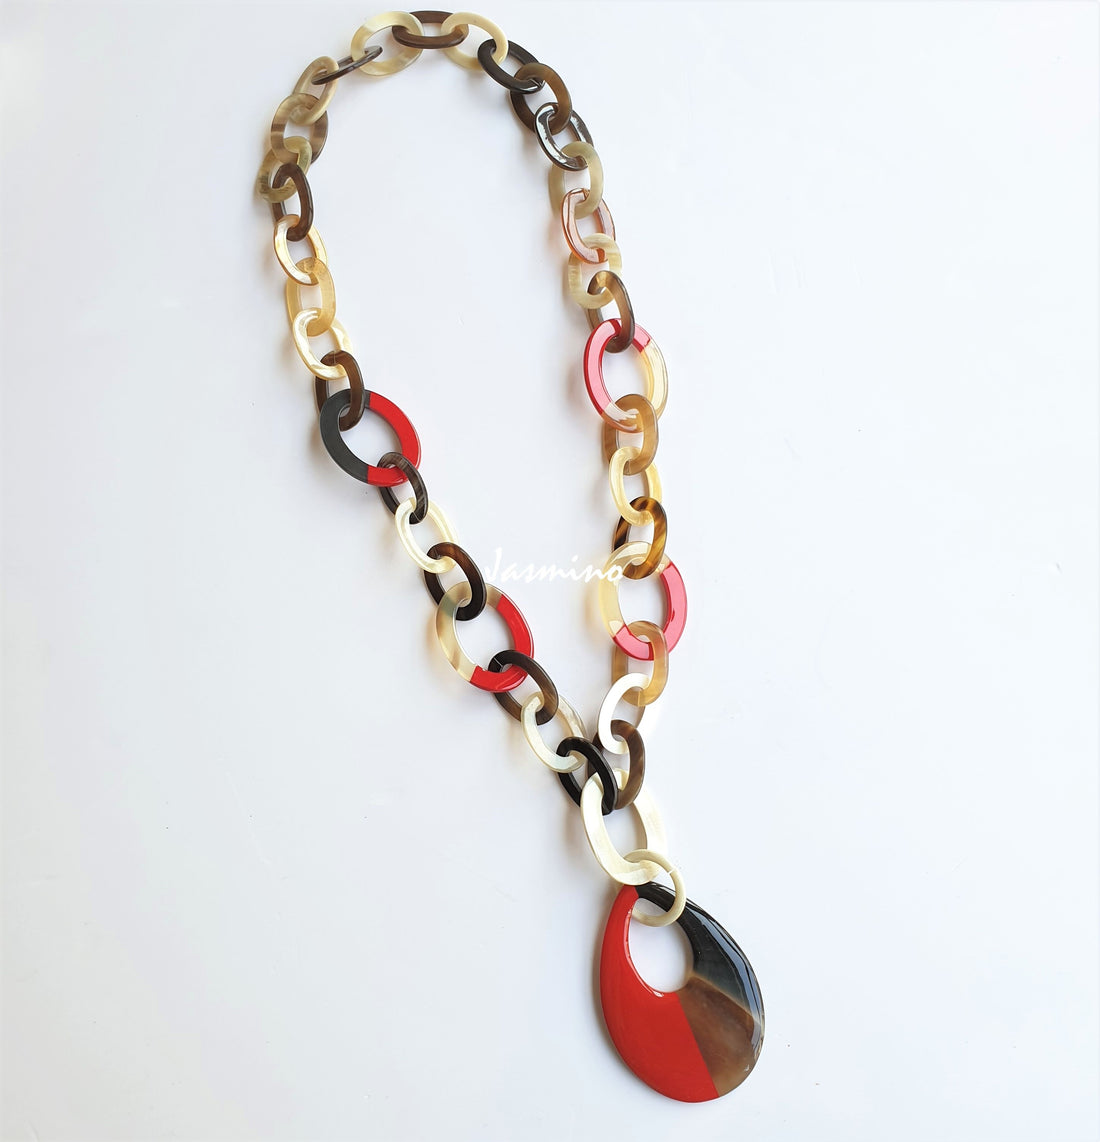 Jasmino unique handmade Vintage chain link necklace features red and white in natural buffalo horn for women